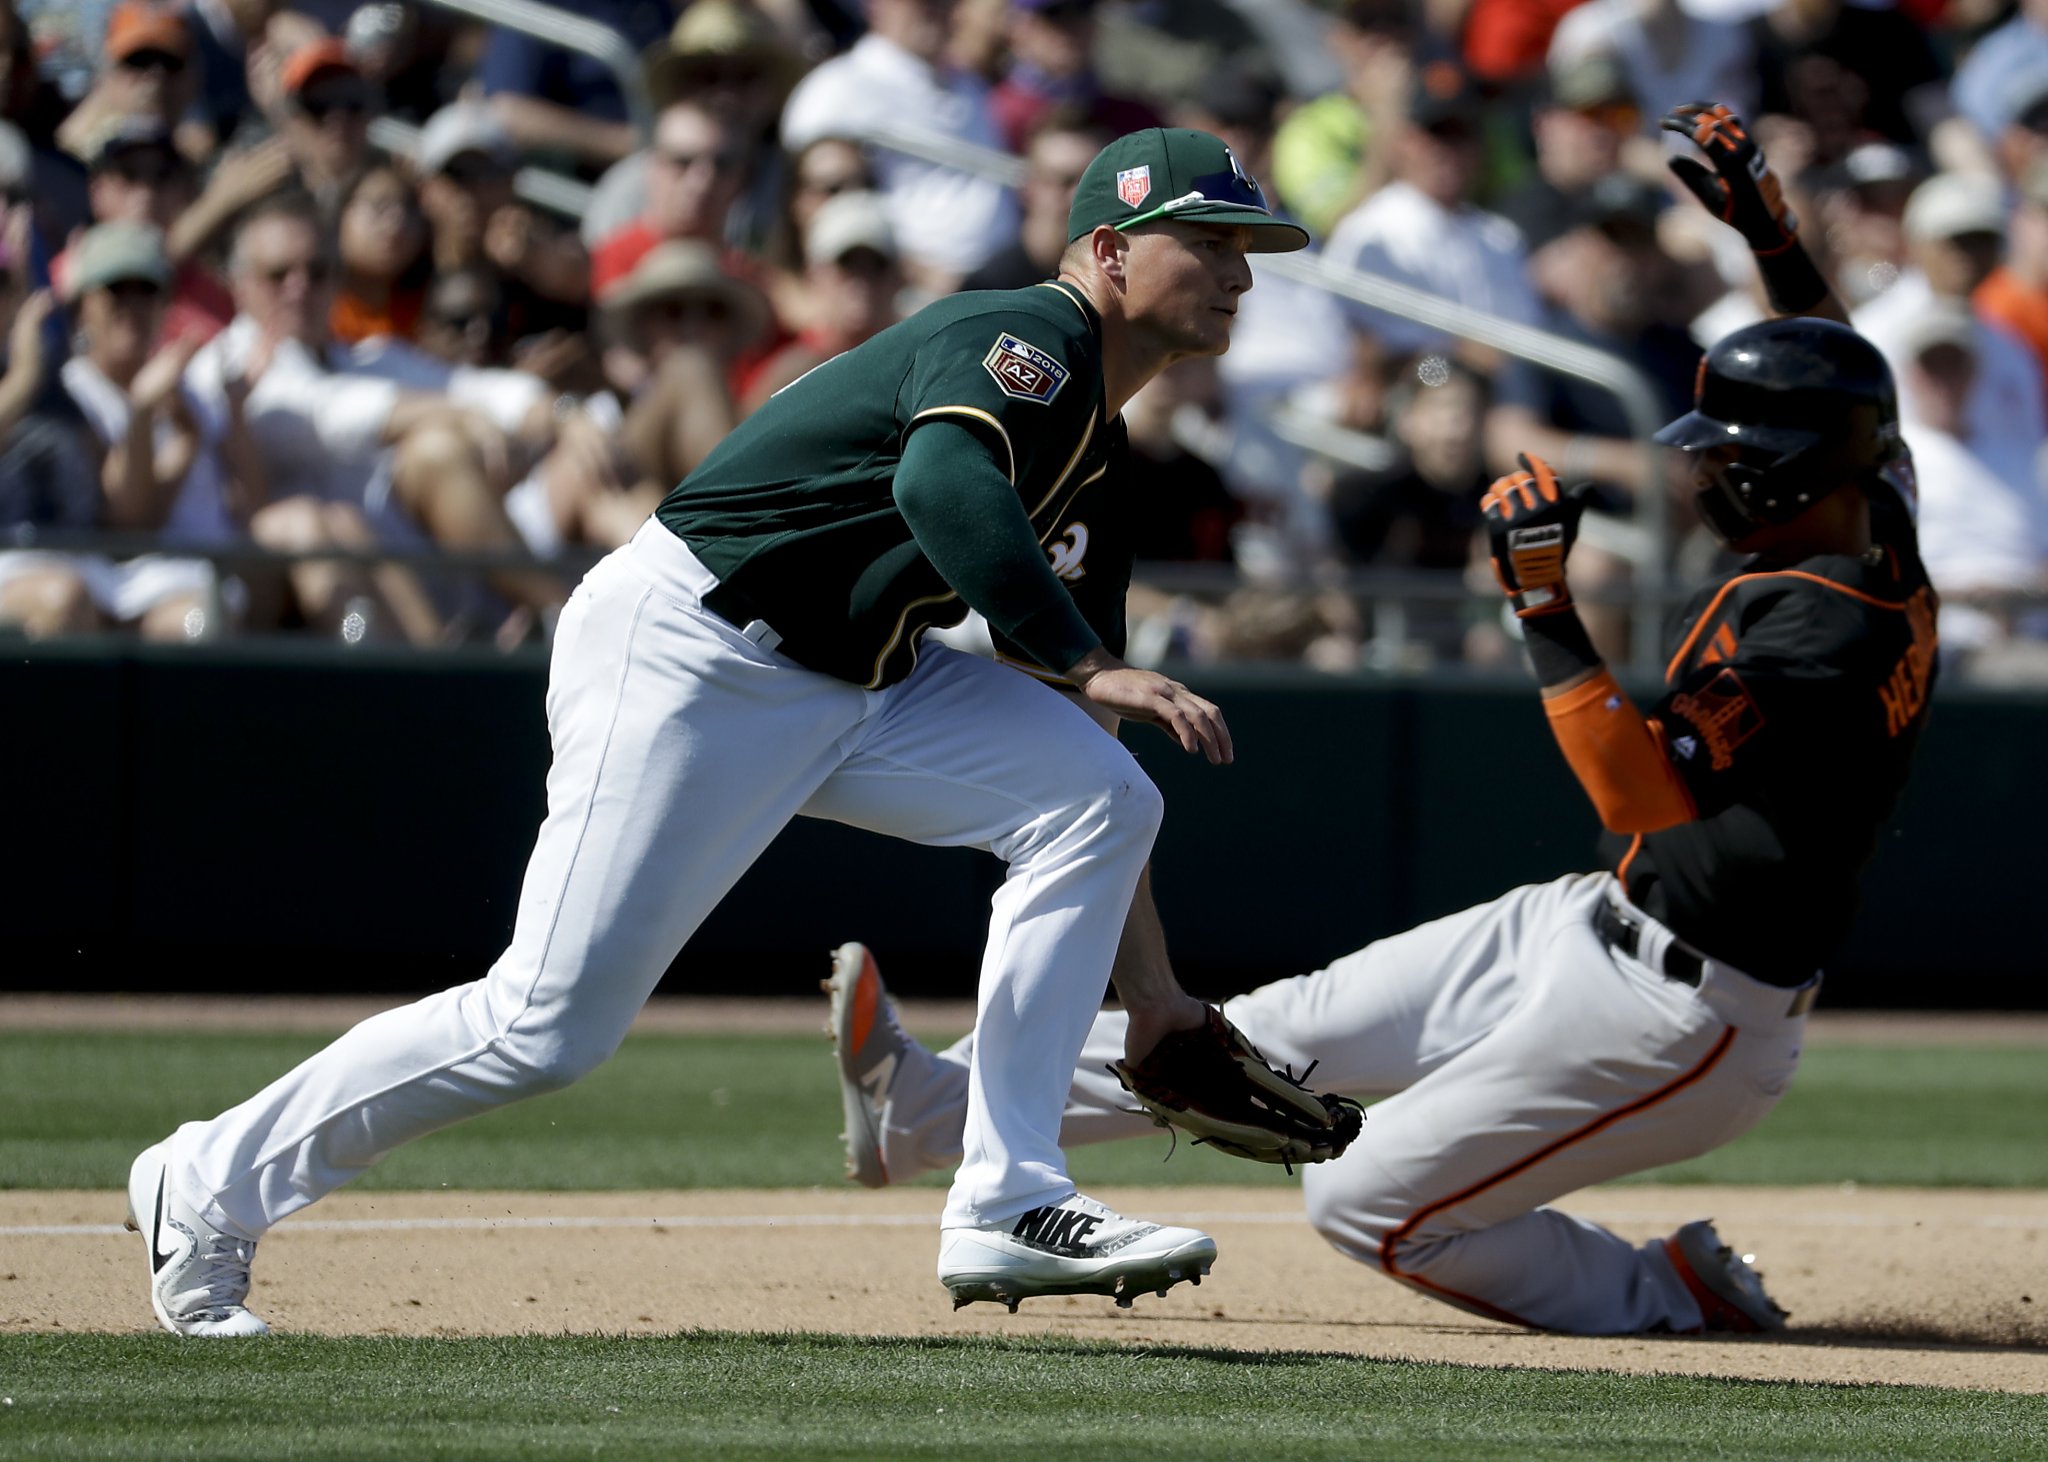 Five pressing questions SF Giants did or didn't answer in spring training